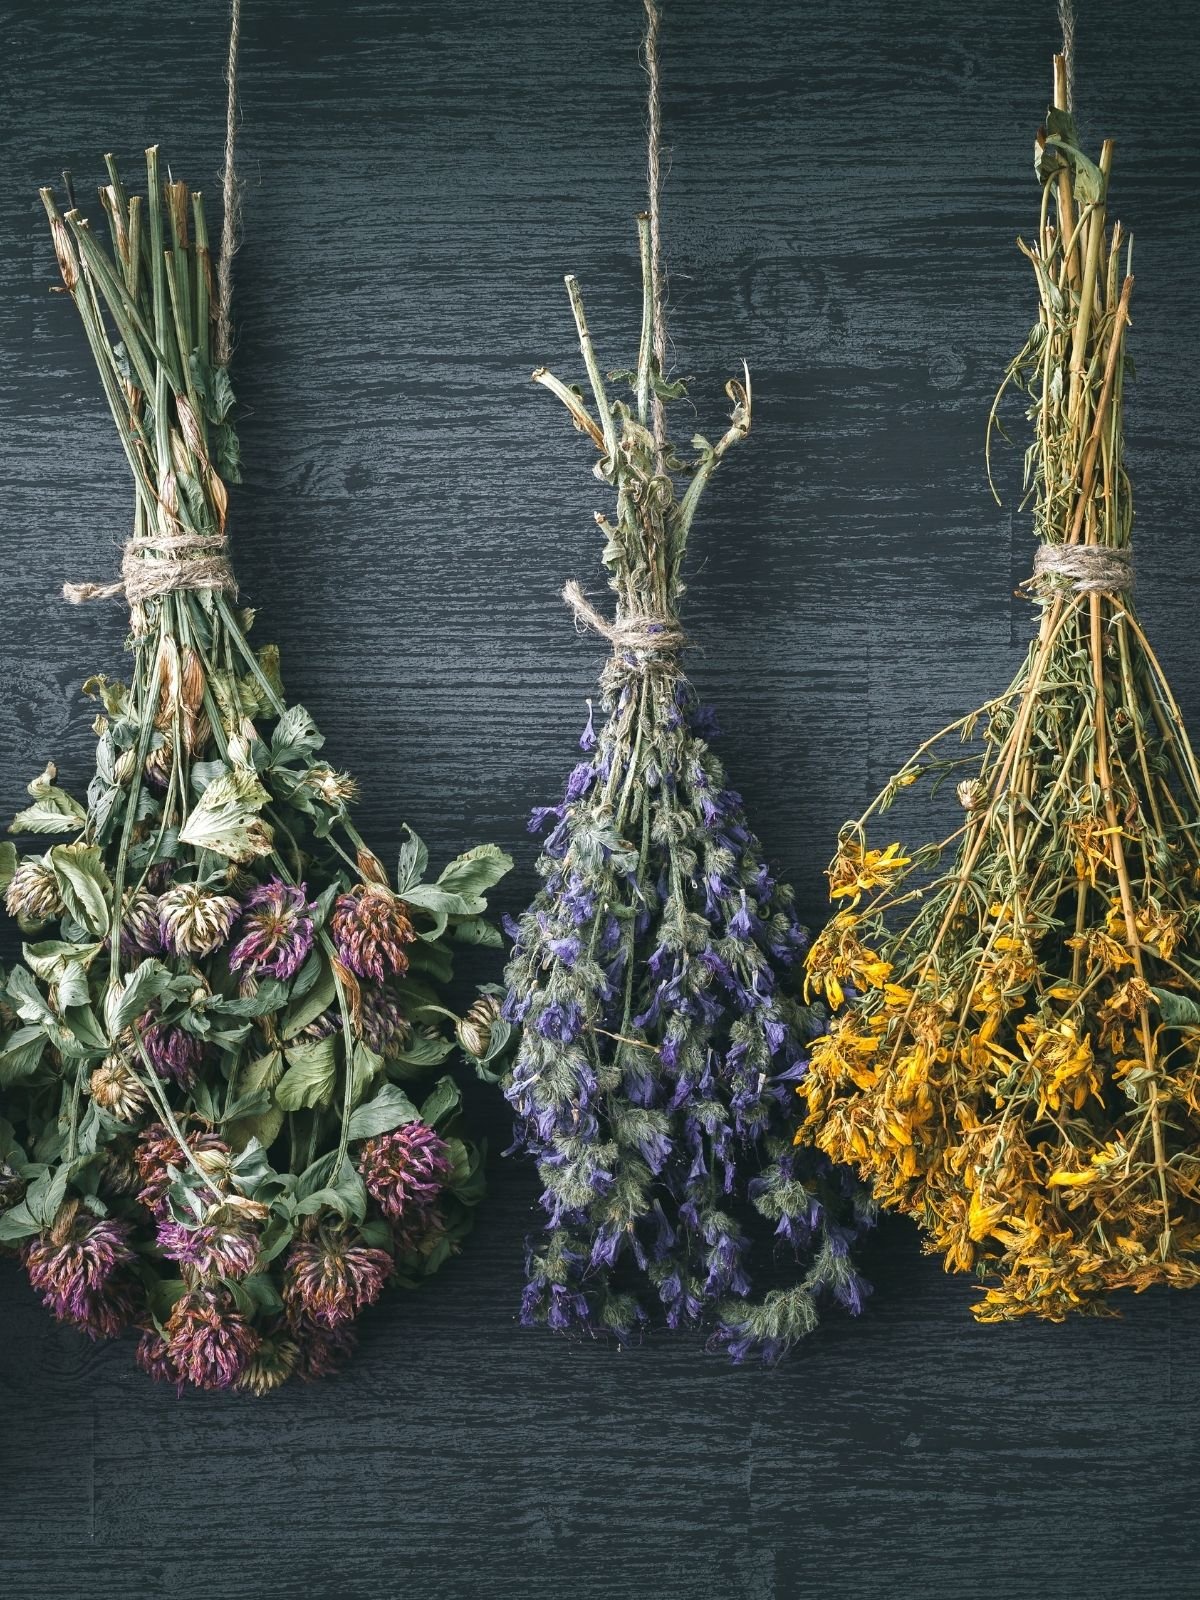 7 Awesome Benefits of Dried Flowers